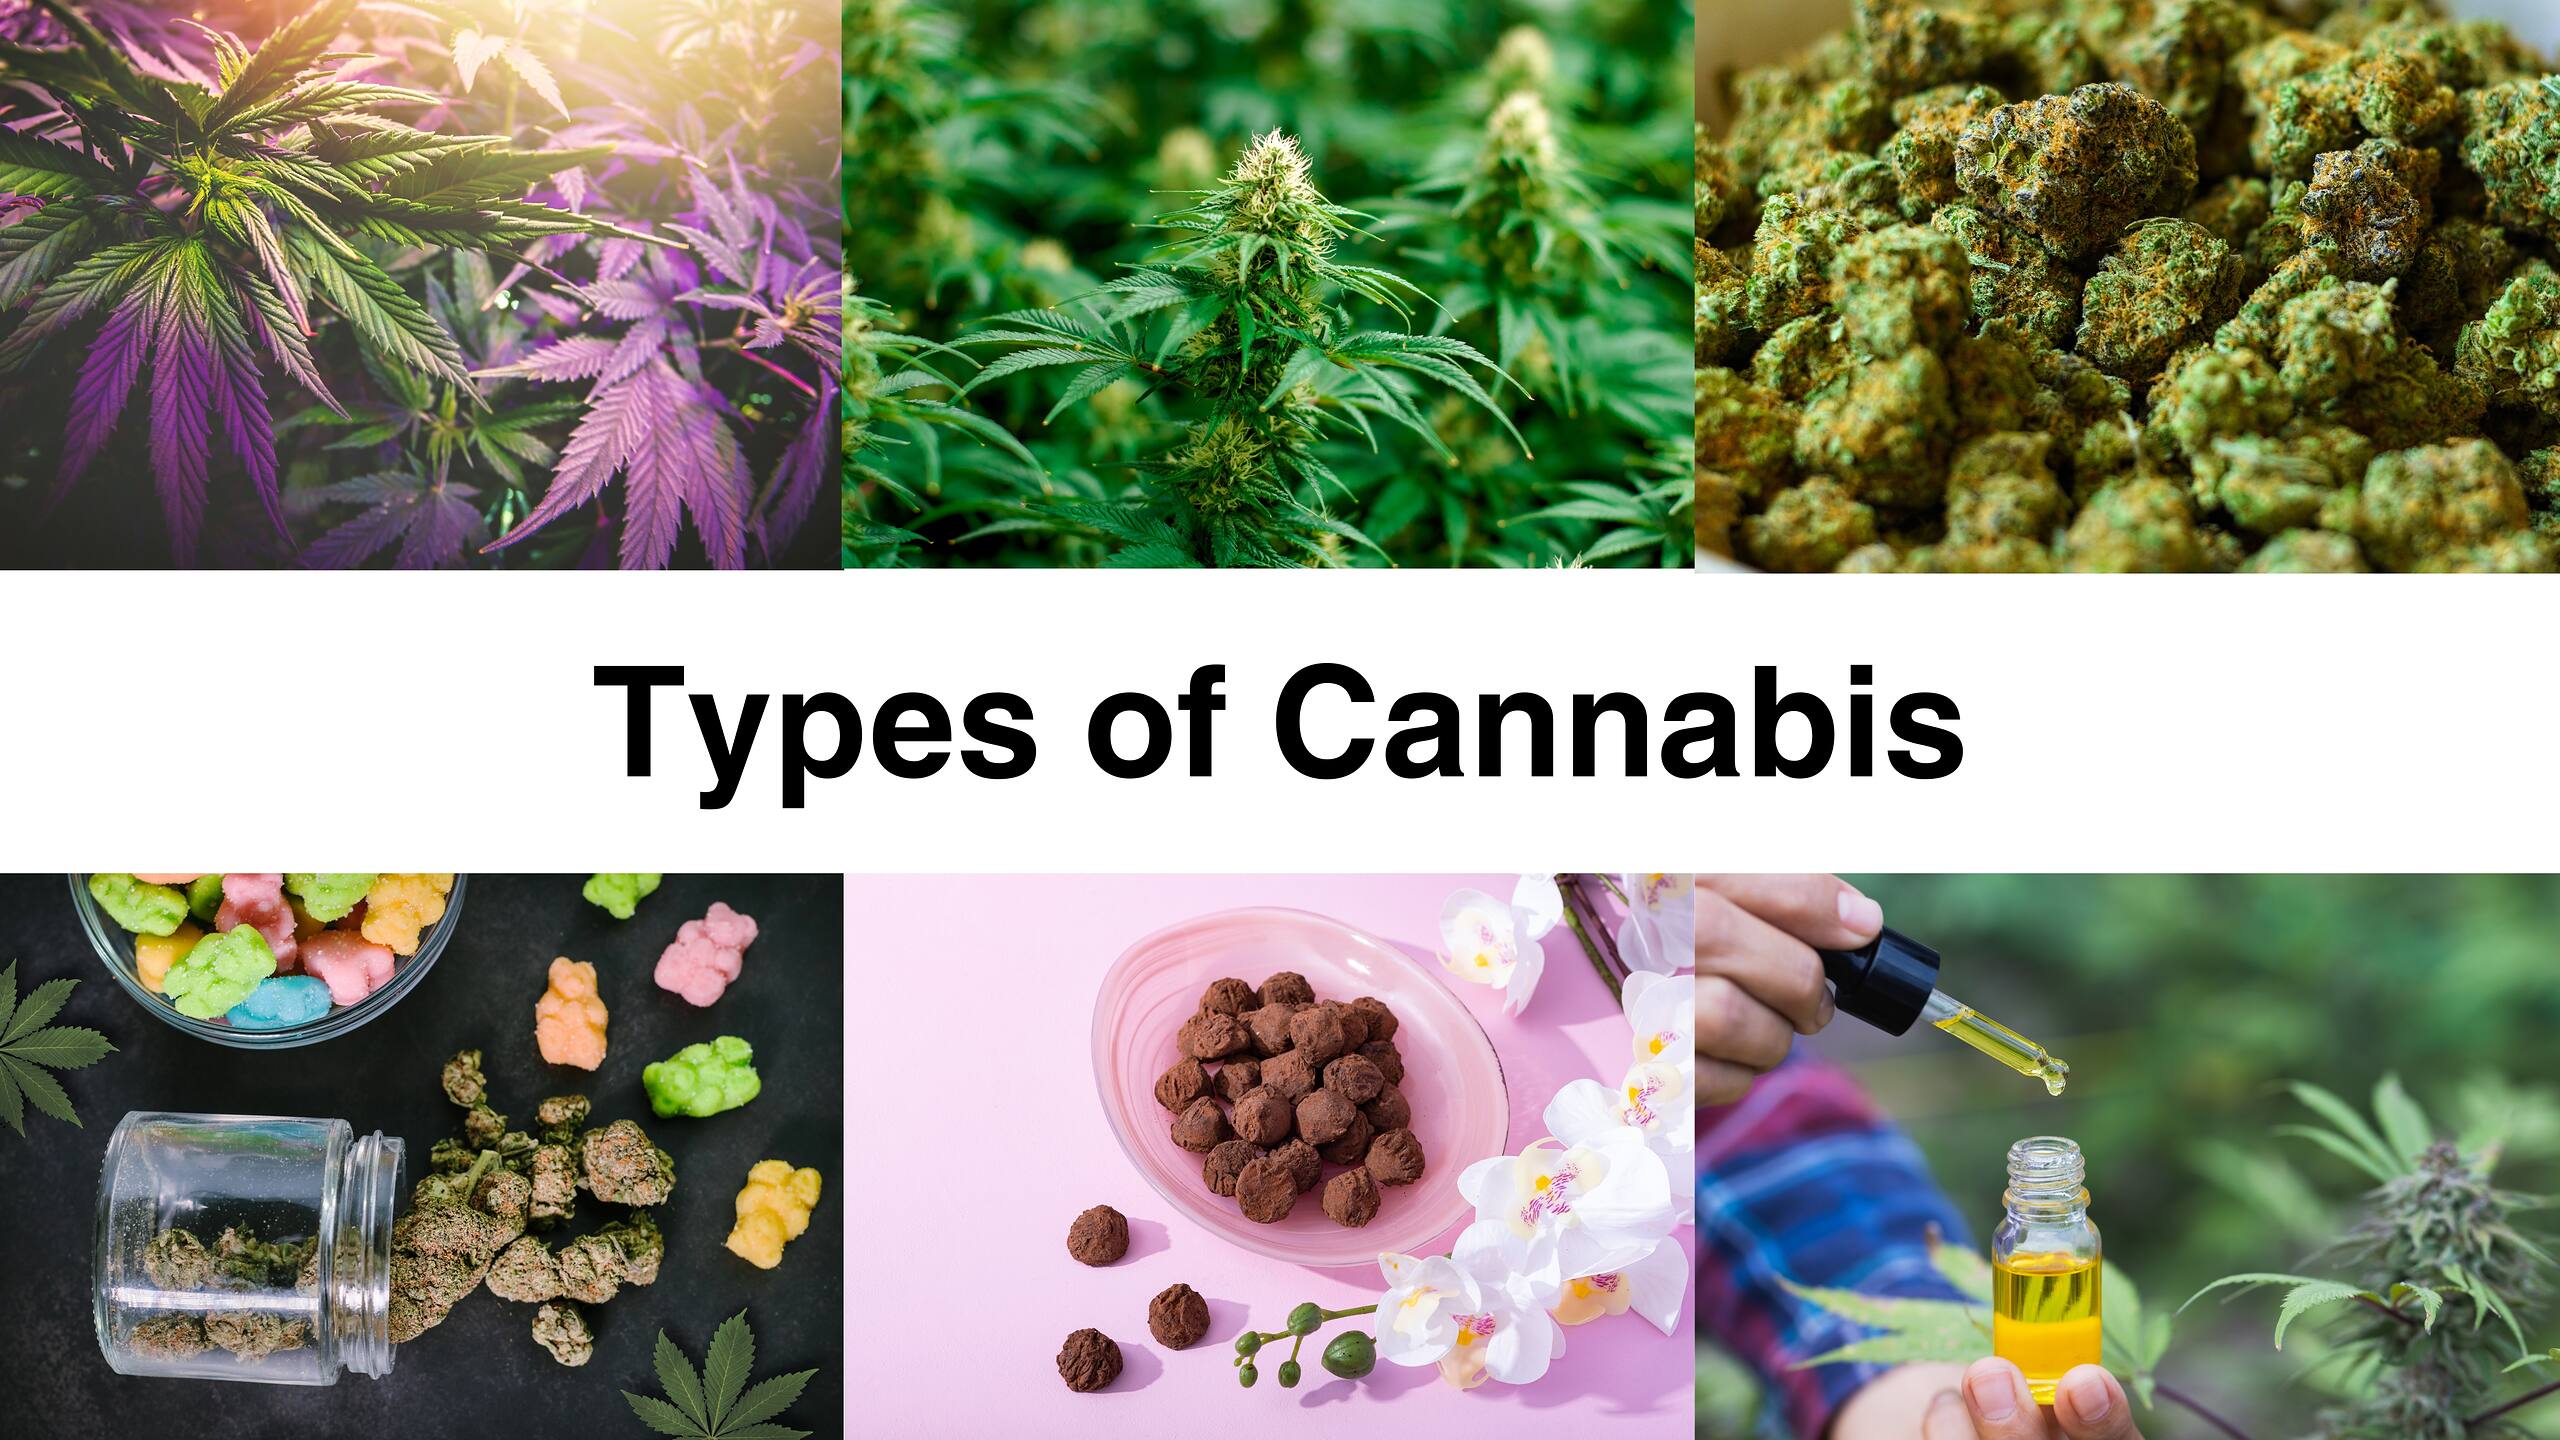 Types of Cannabis images of plants CBD